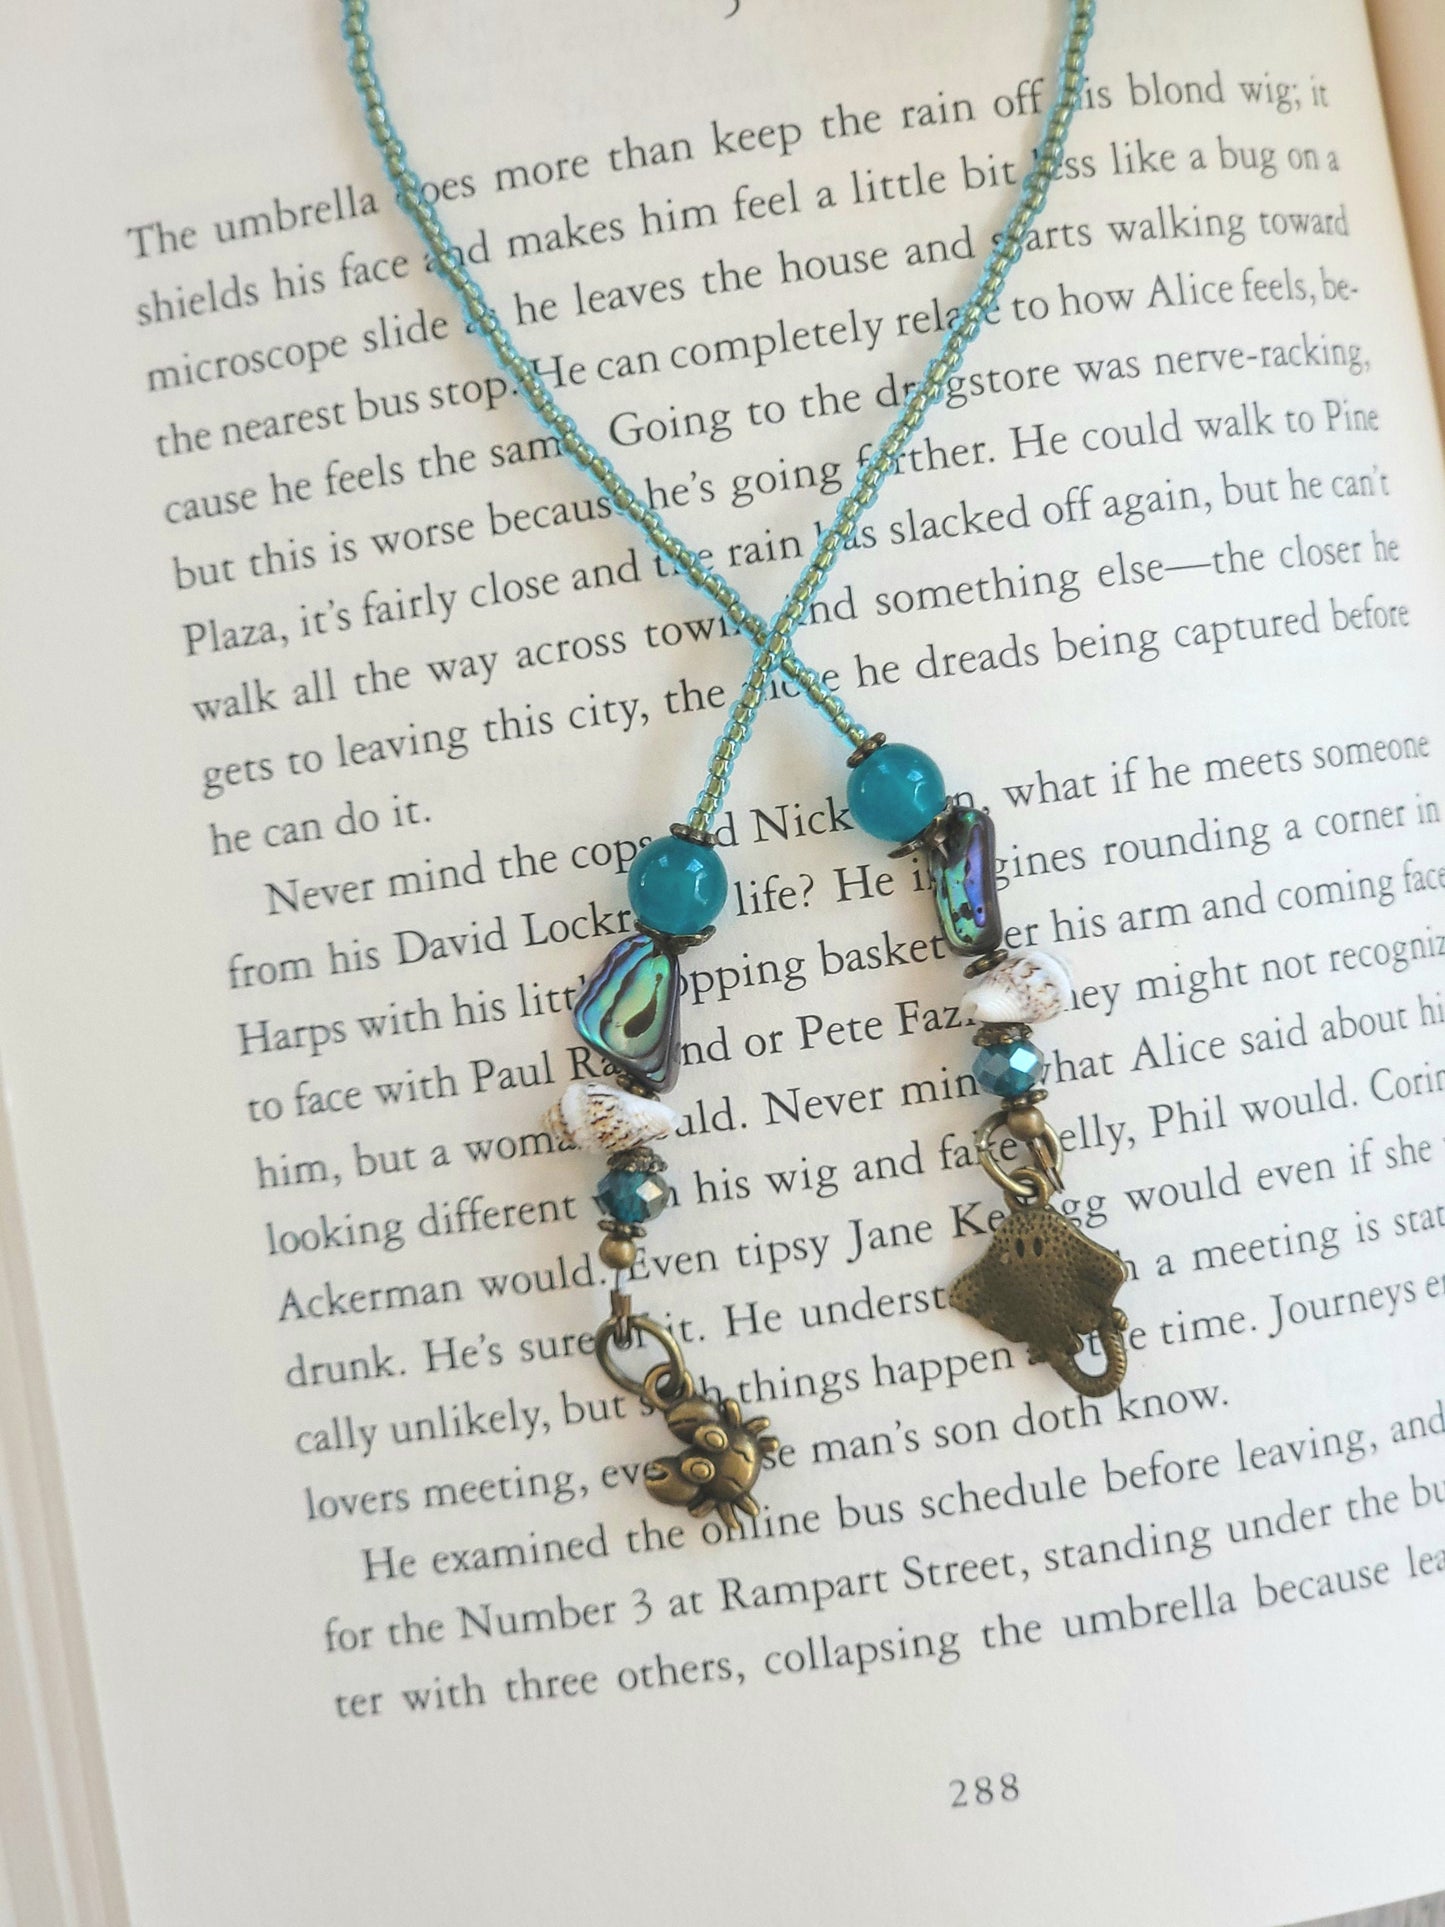 Magical Ocean-Inspired Bookmark: Abalone and Beads with Cute Sea Creature Charms